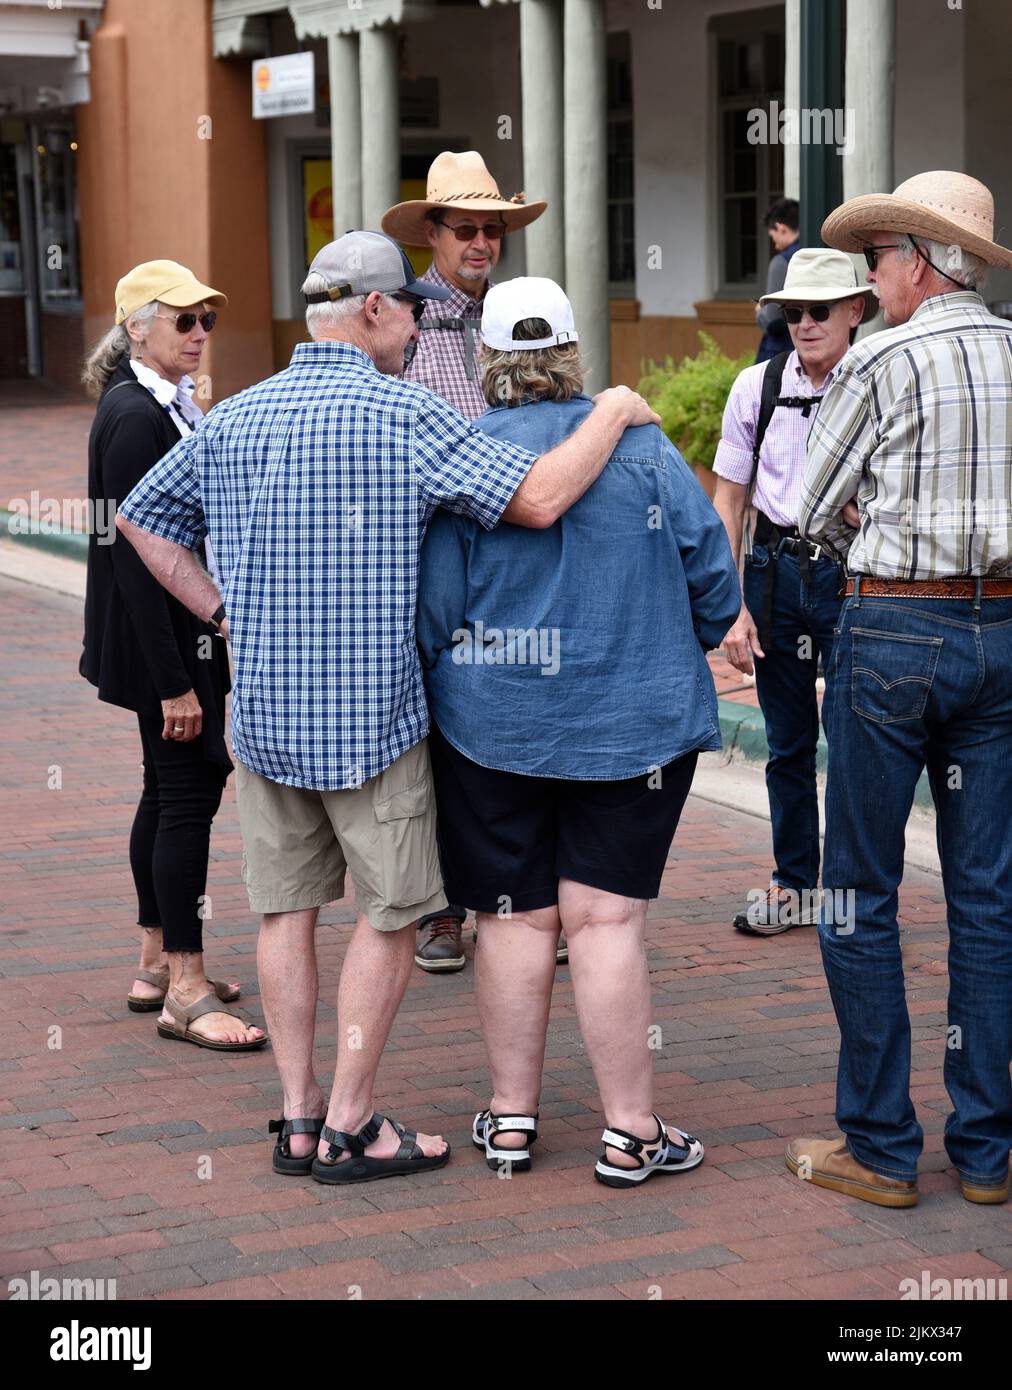 A tour guide leads a group of visitors around the historic district in Santa Fe, New Mexico. Stock Photo